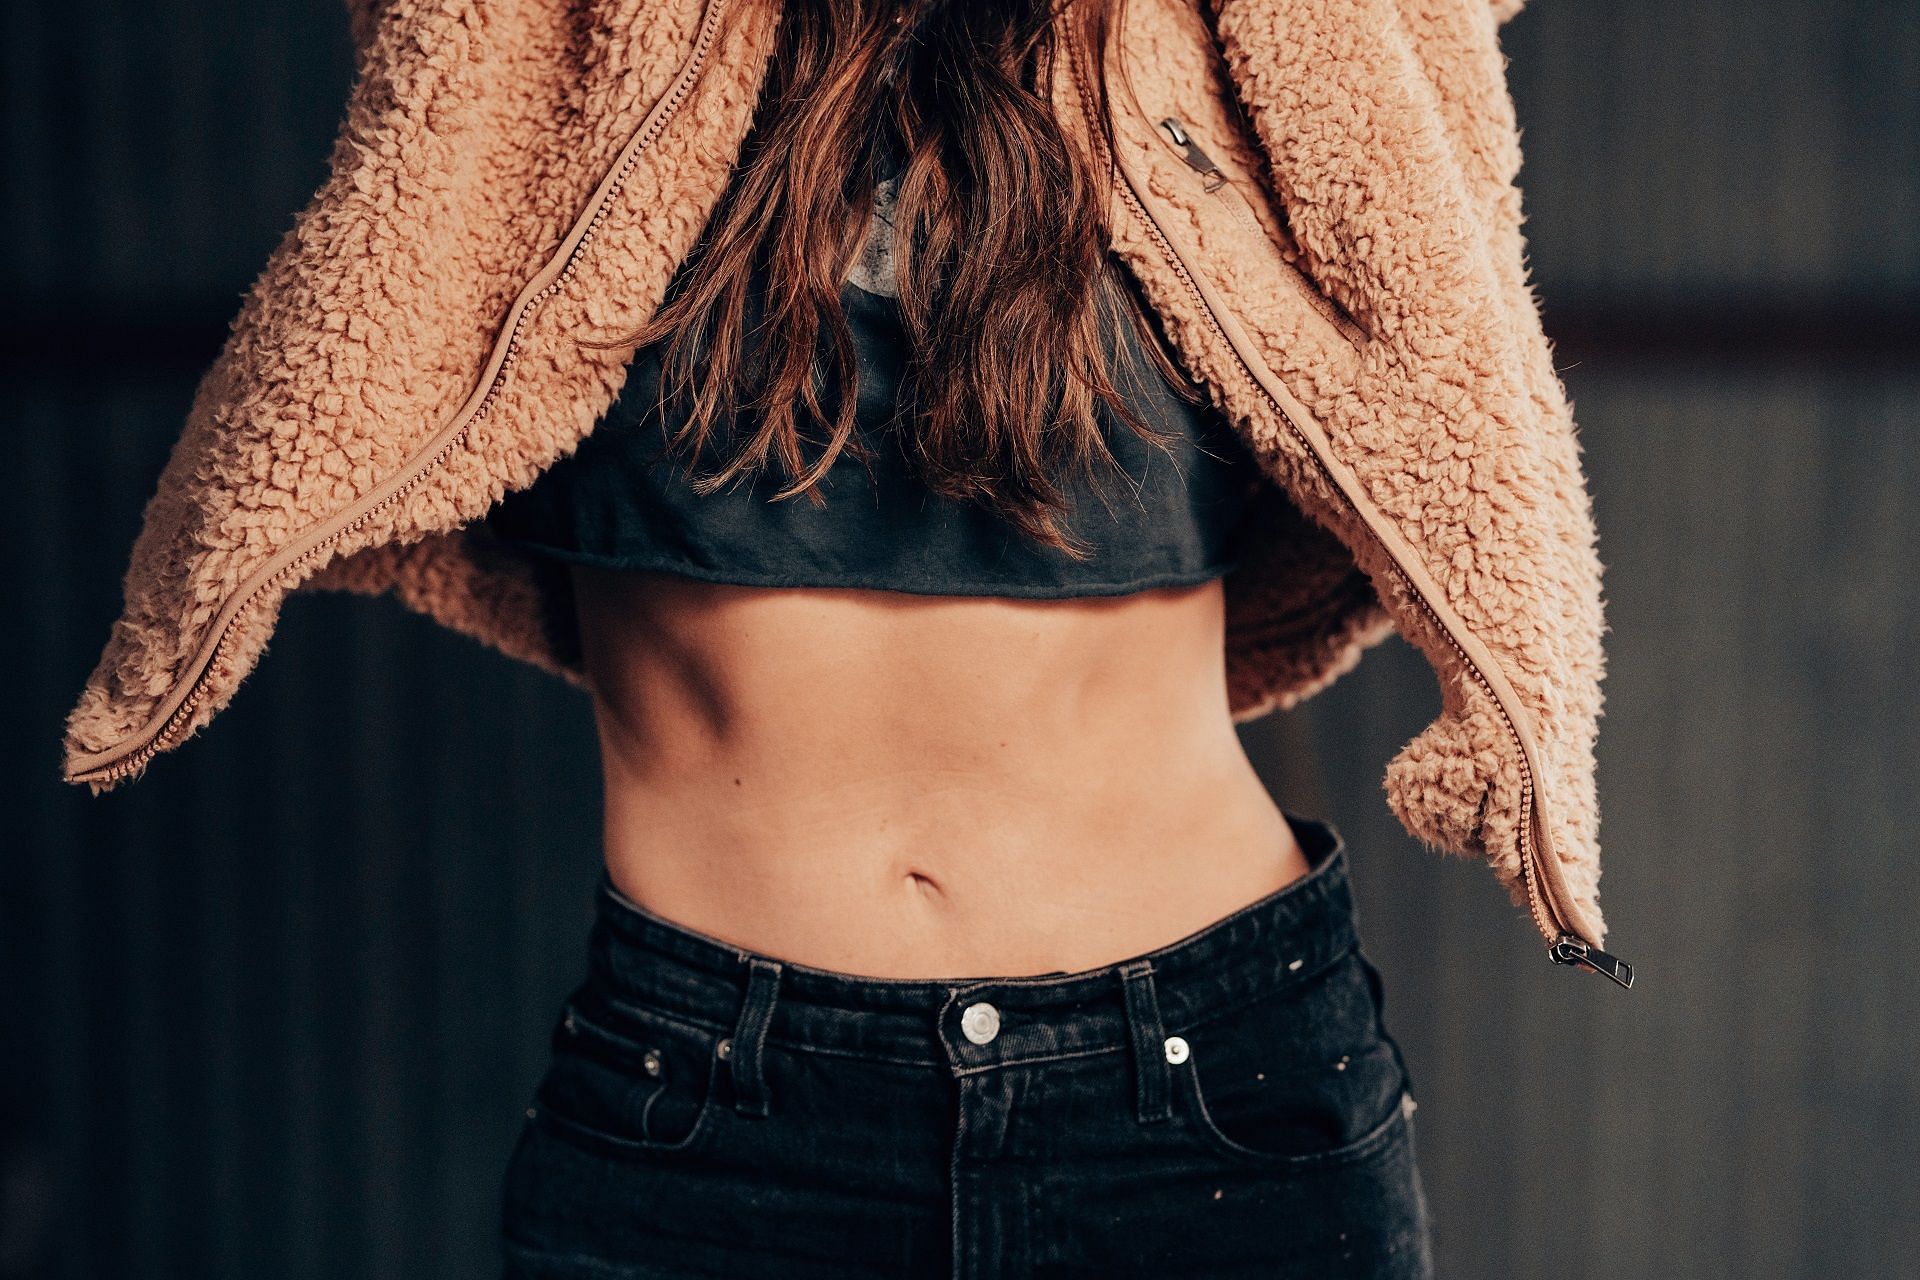 Doing these exercises will help you in getting a flat stomach. (Image via Unsplash/Jason Yoder)